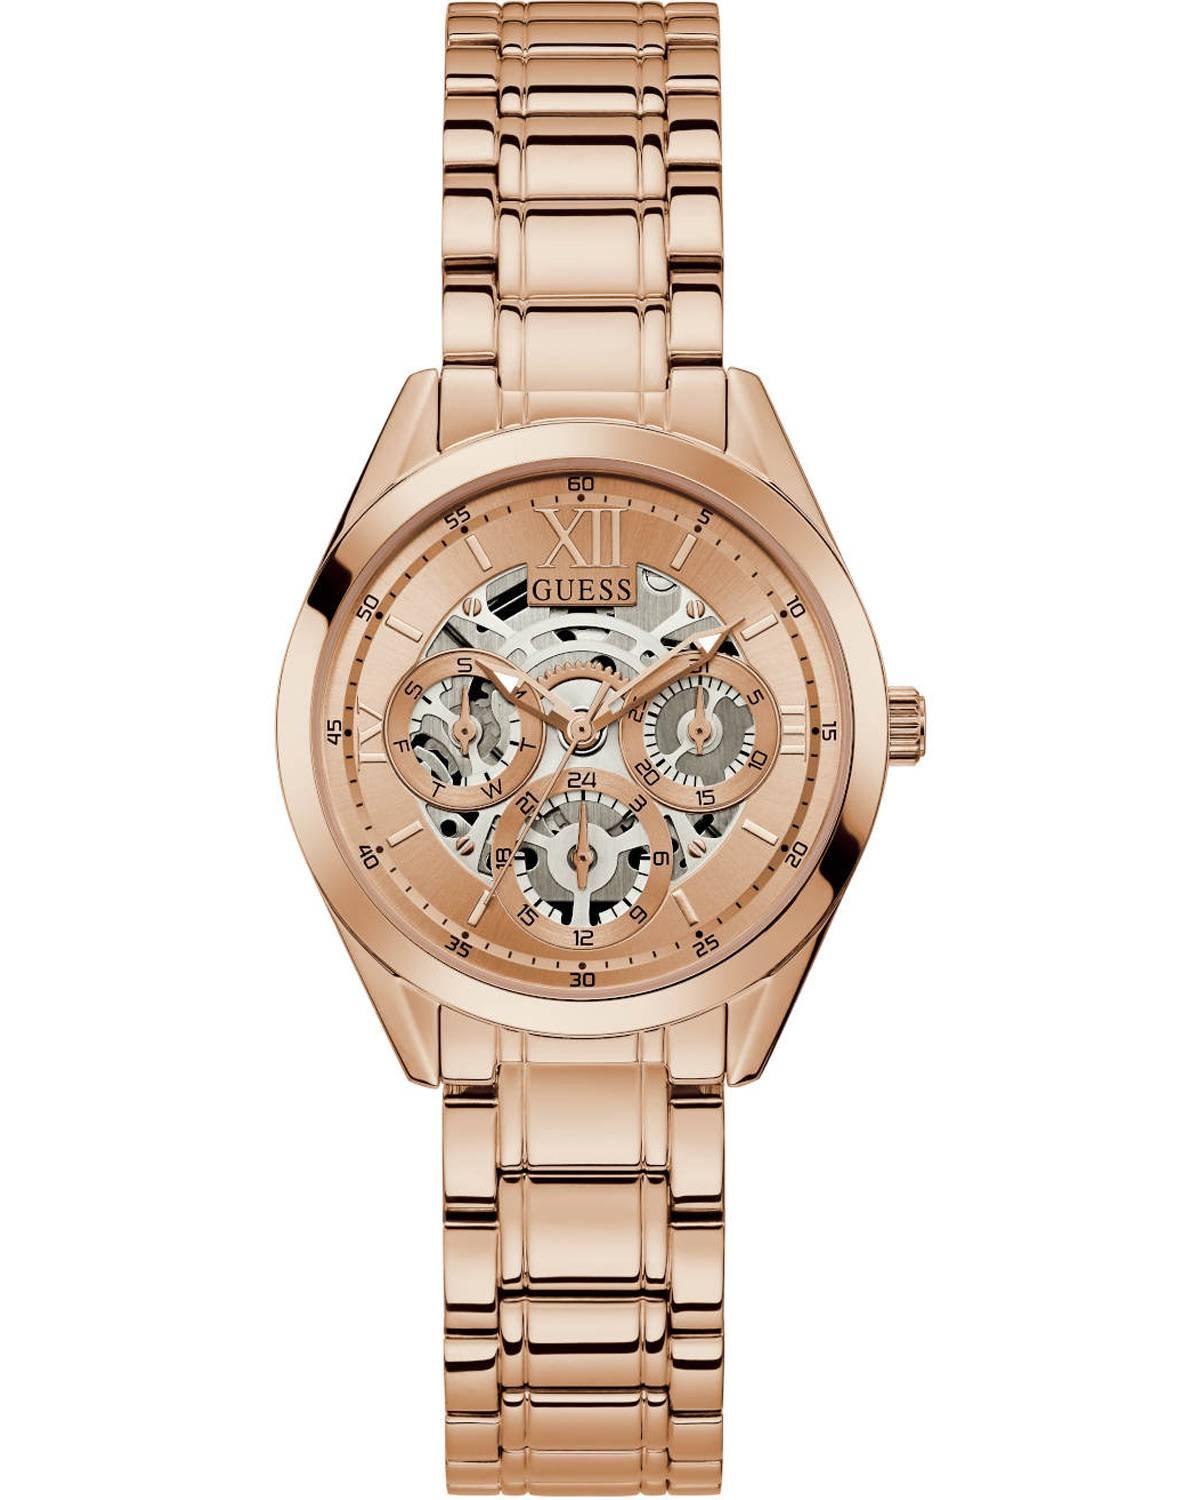 guess clear cut gw0253l3 rose gold case with stainless steel bracelet image1111111111